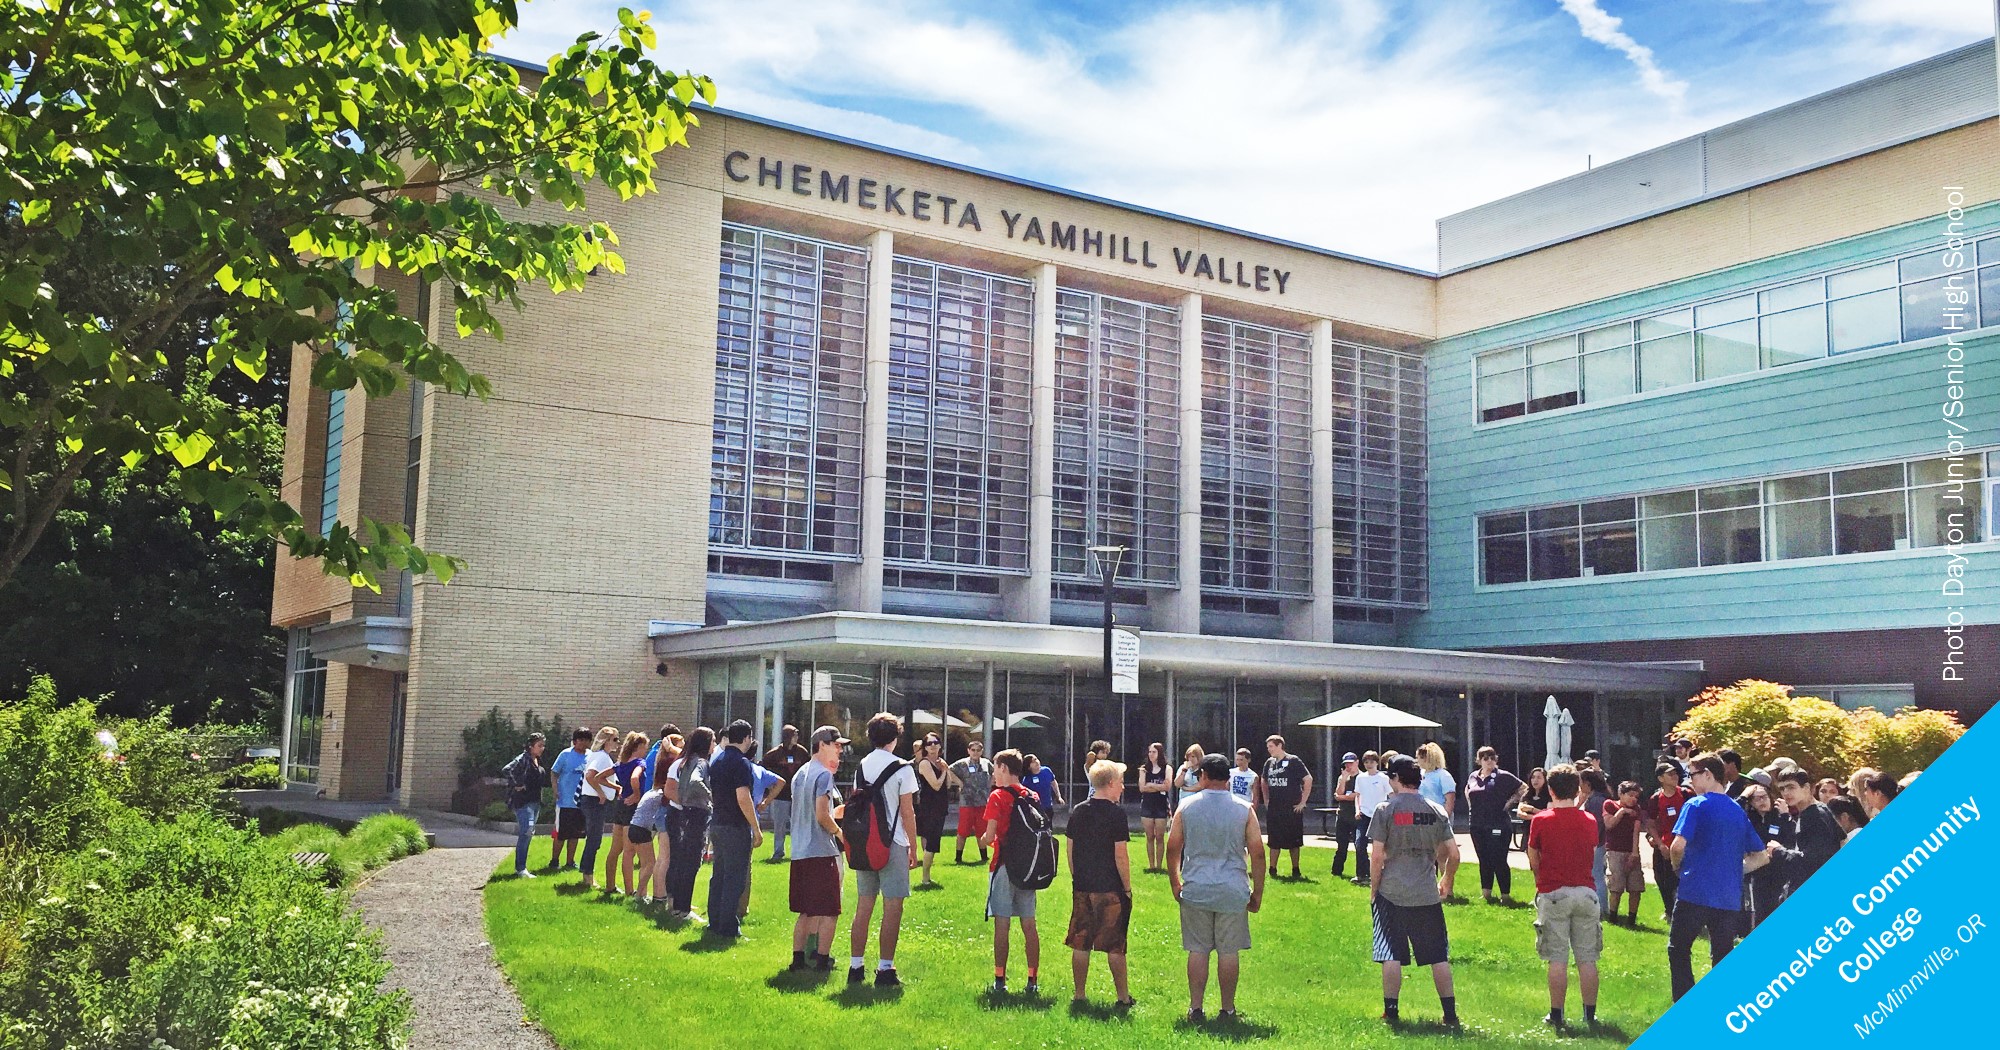 Students standing in a circle in front of Chemeketa Yamhill Valley building